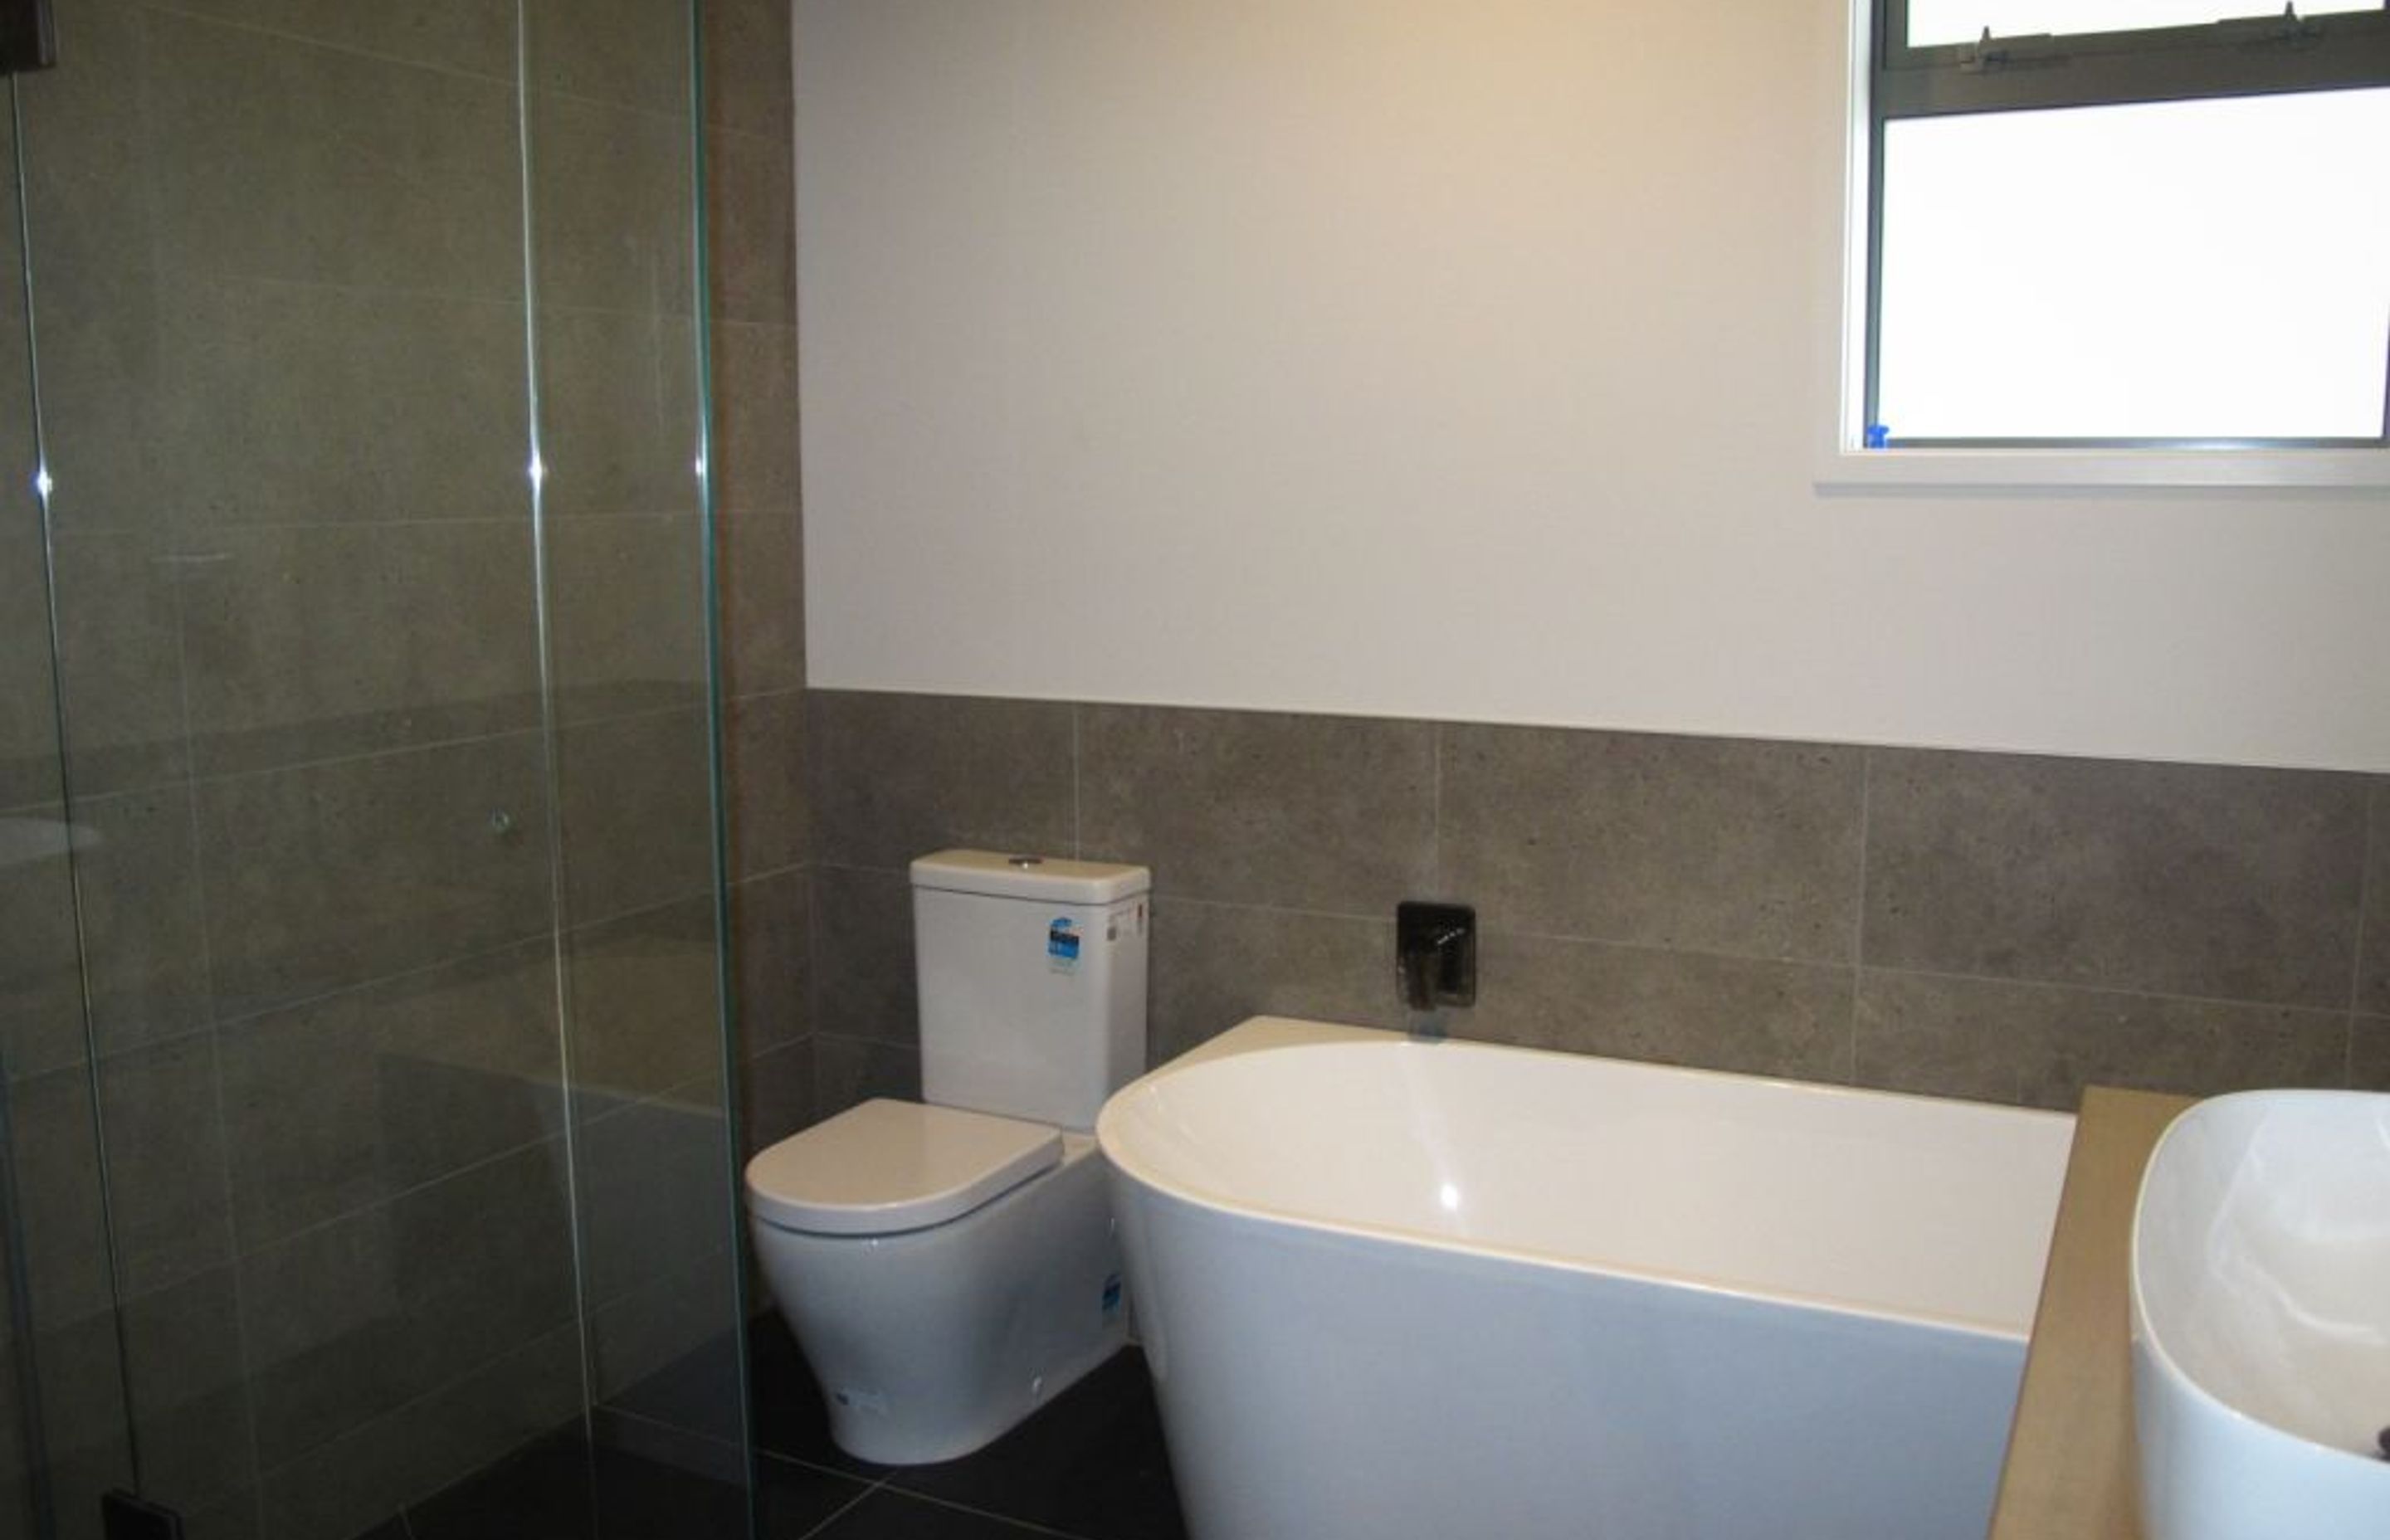 The main bathroom with tiled shower in a new residential build